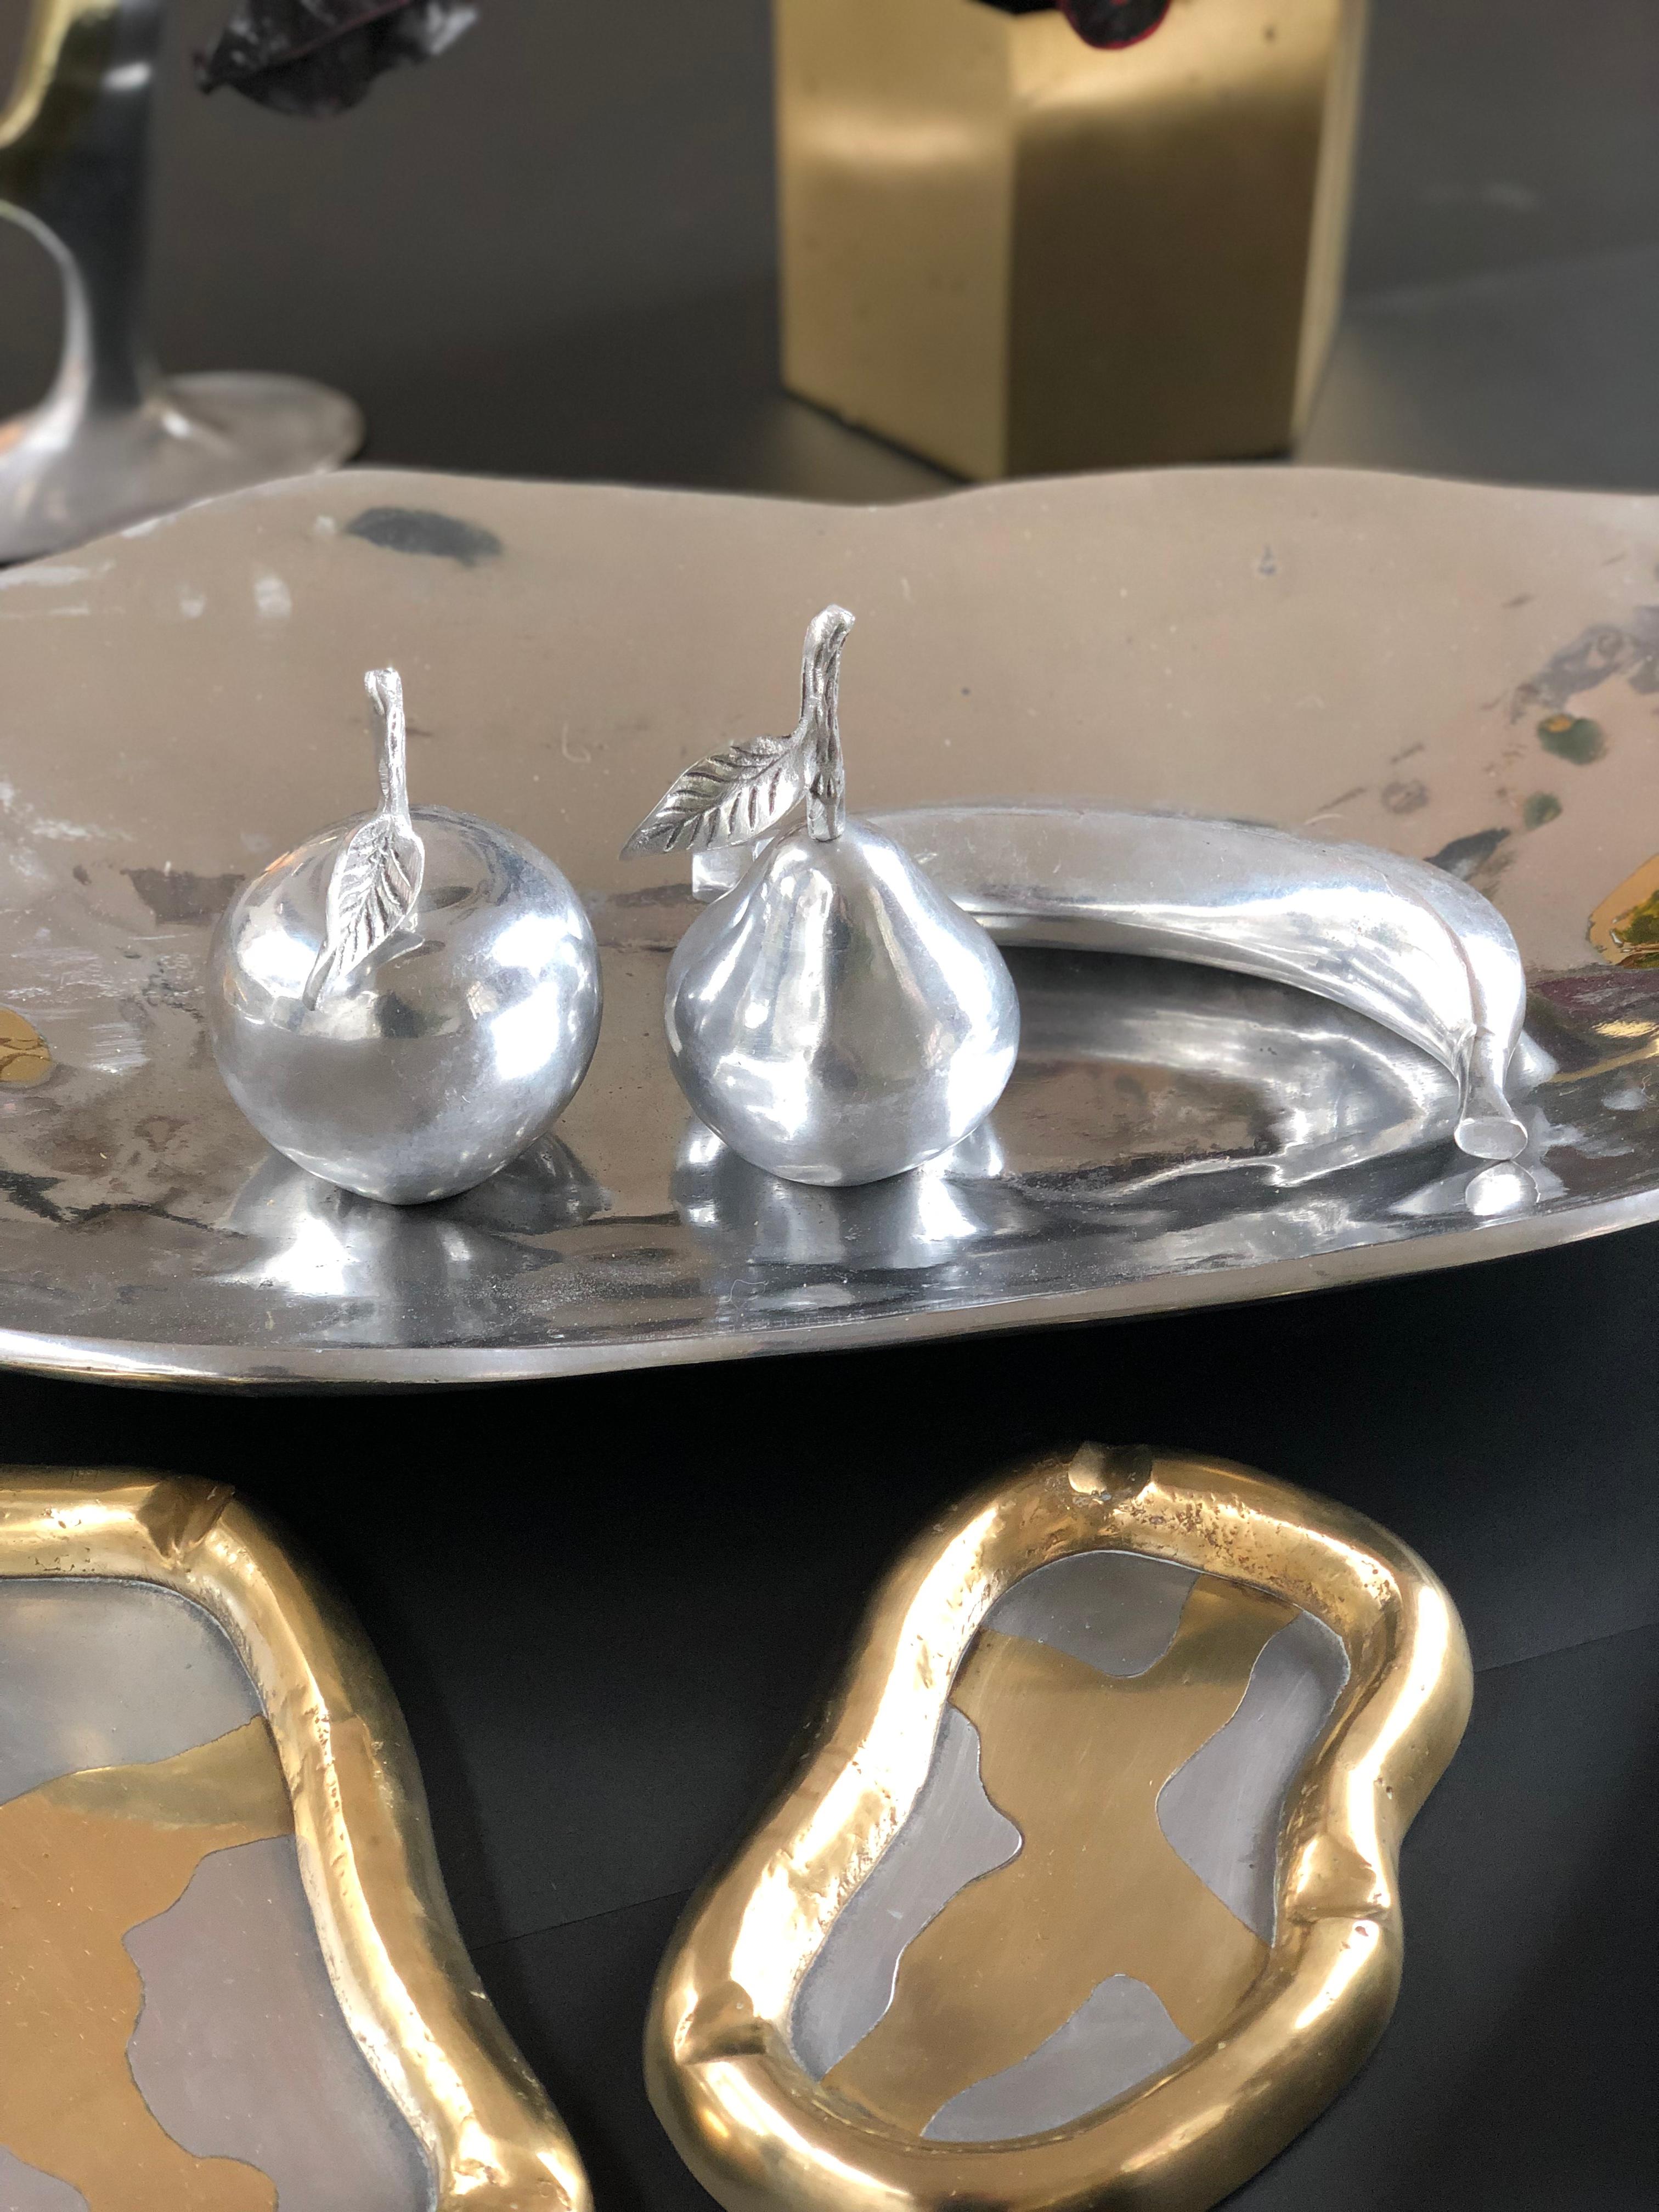 Decorative fruit pieces in polished aluminium (circa 1970s). Adaptable to any decorating style, faux fruit seems a perfect fit. Three shiny aluminium pieces of fruit - an apple, pear and banana - in authentic sizes provide a stunning monochromatic